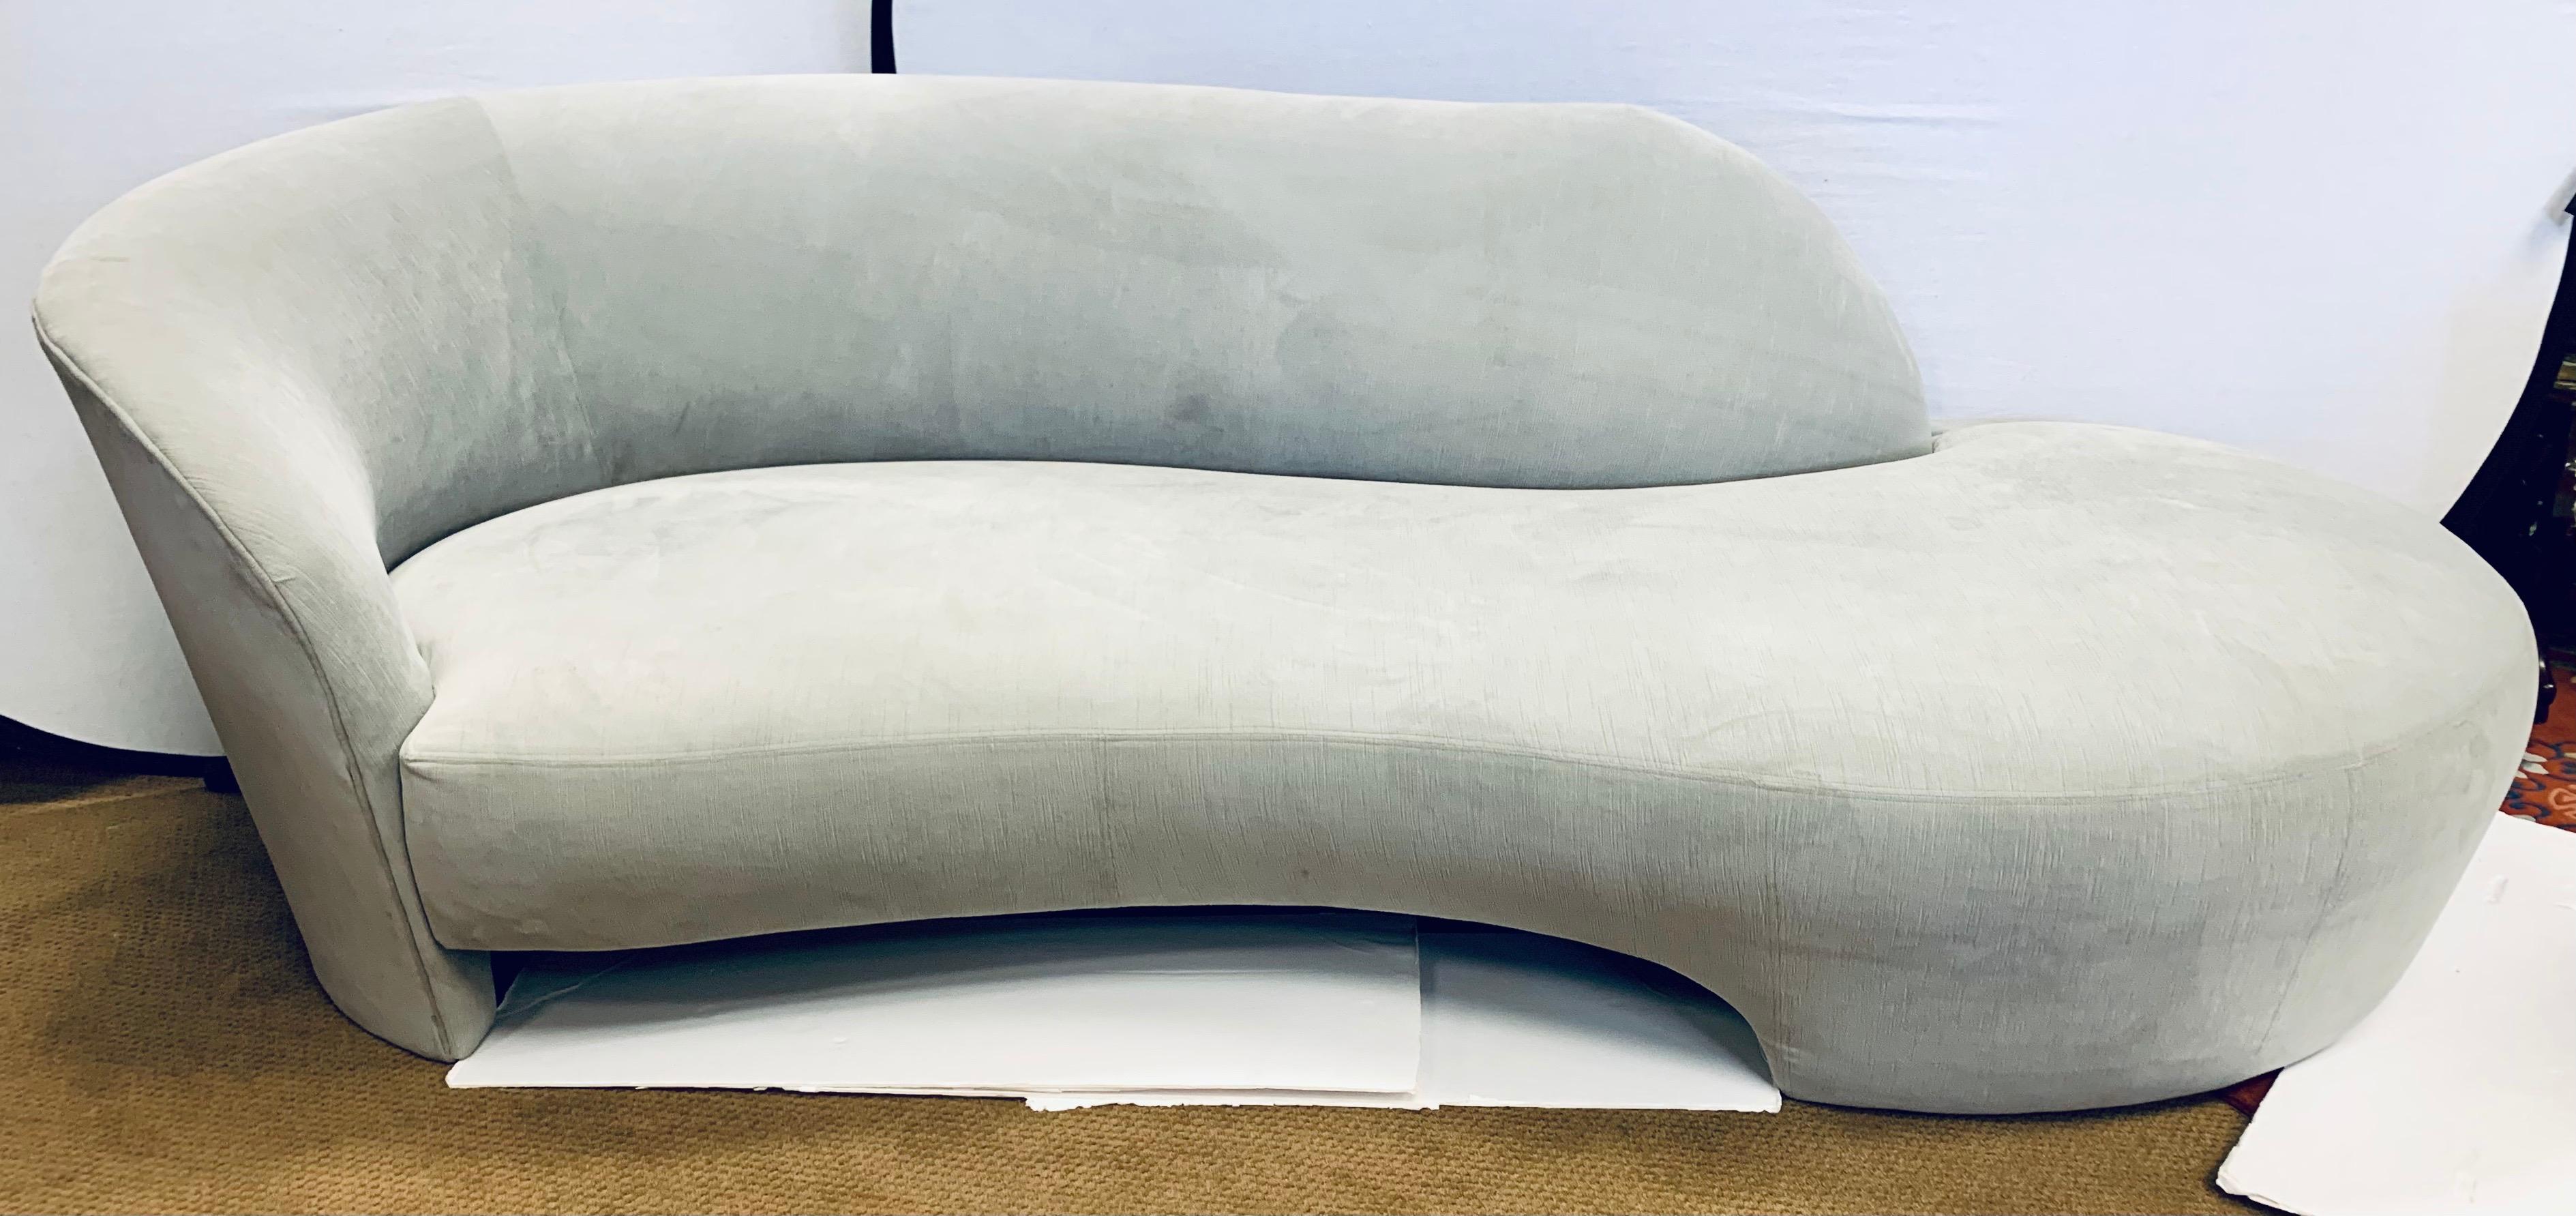 Stunning organic sculptural serpentine sofa with great scale and lines to die for. The luxurious gray velvet fabric is less than two years old and is still in very good condition save for a spot or two - see pics. This sofa will be the most